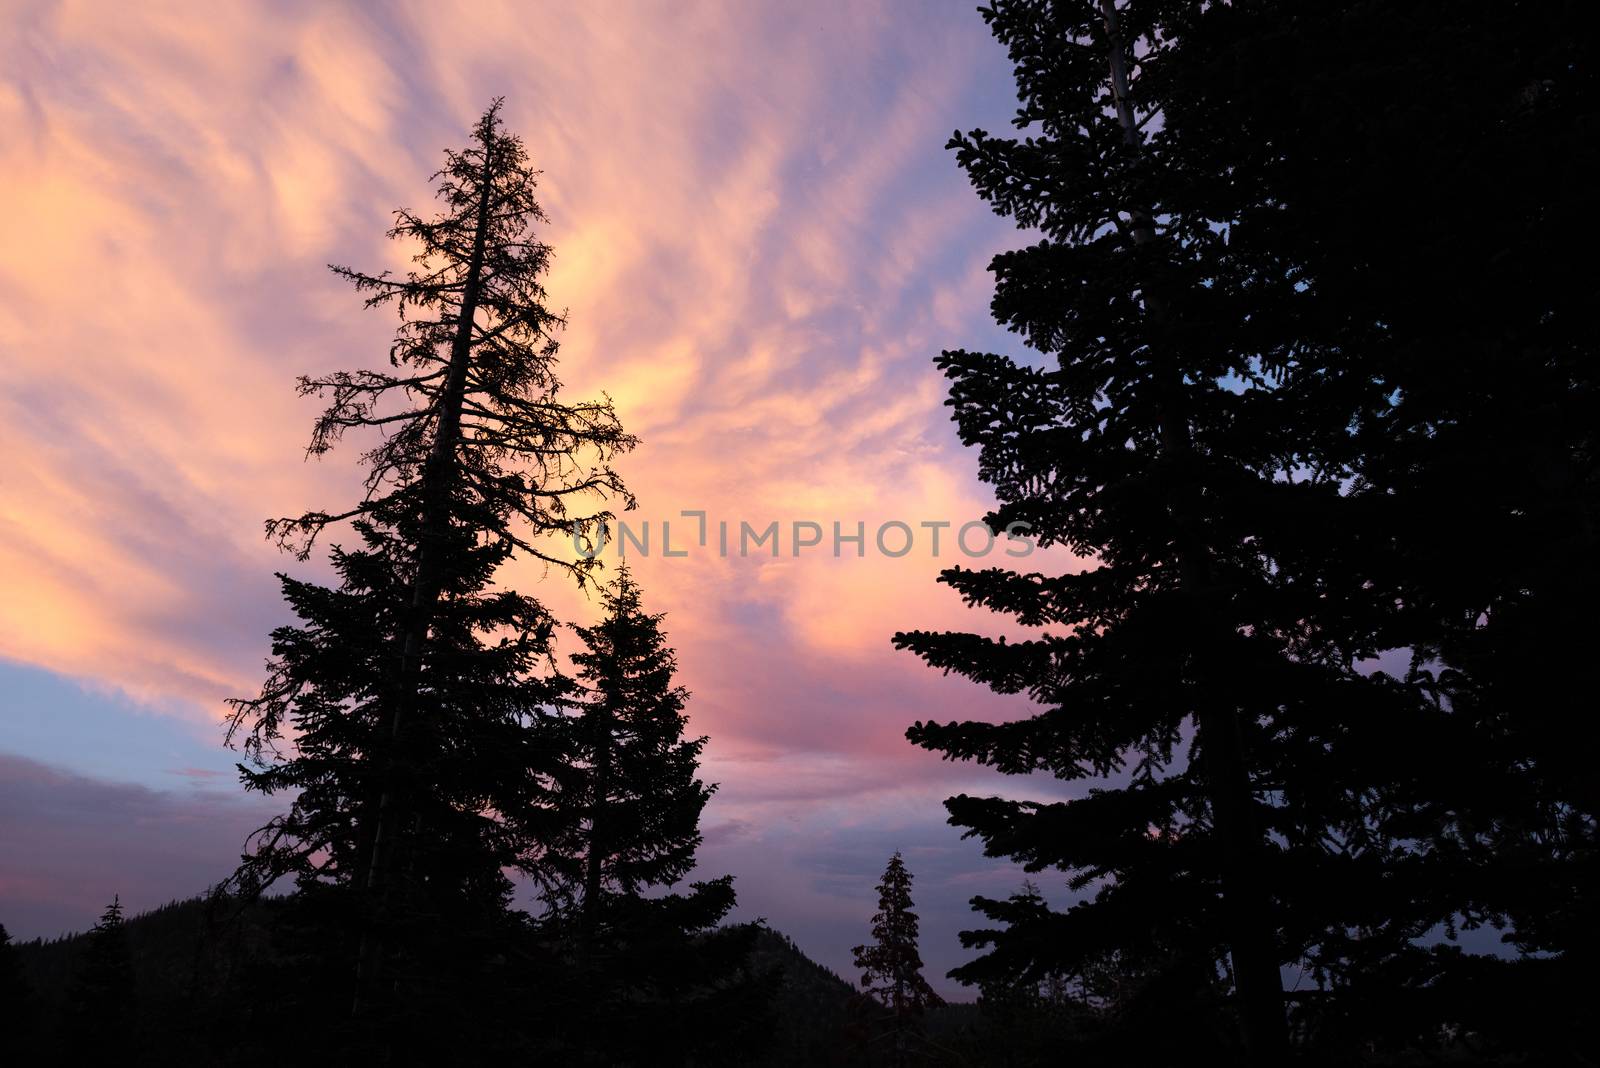 Pine tree silhouetted by sunset, Mammoth Lakes, California by Njean